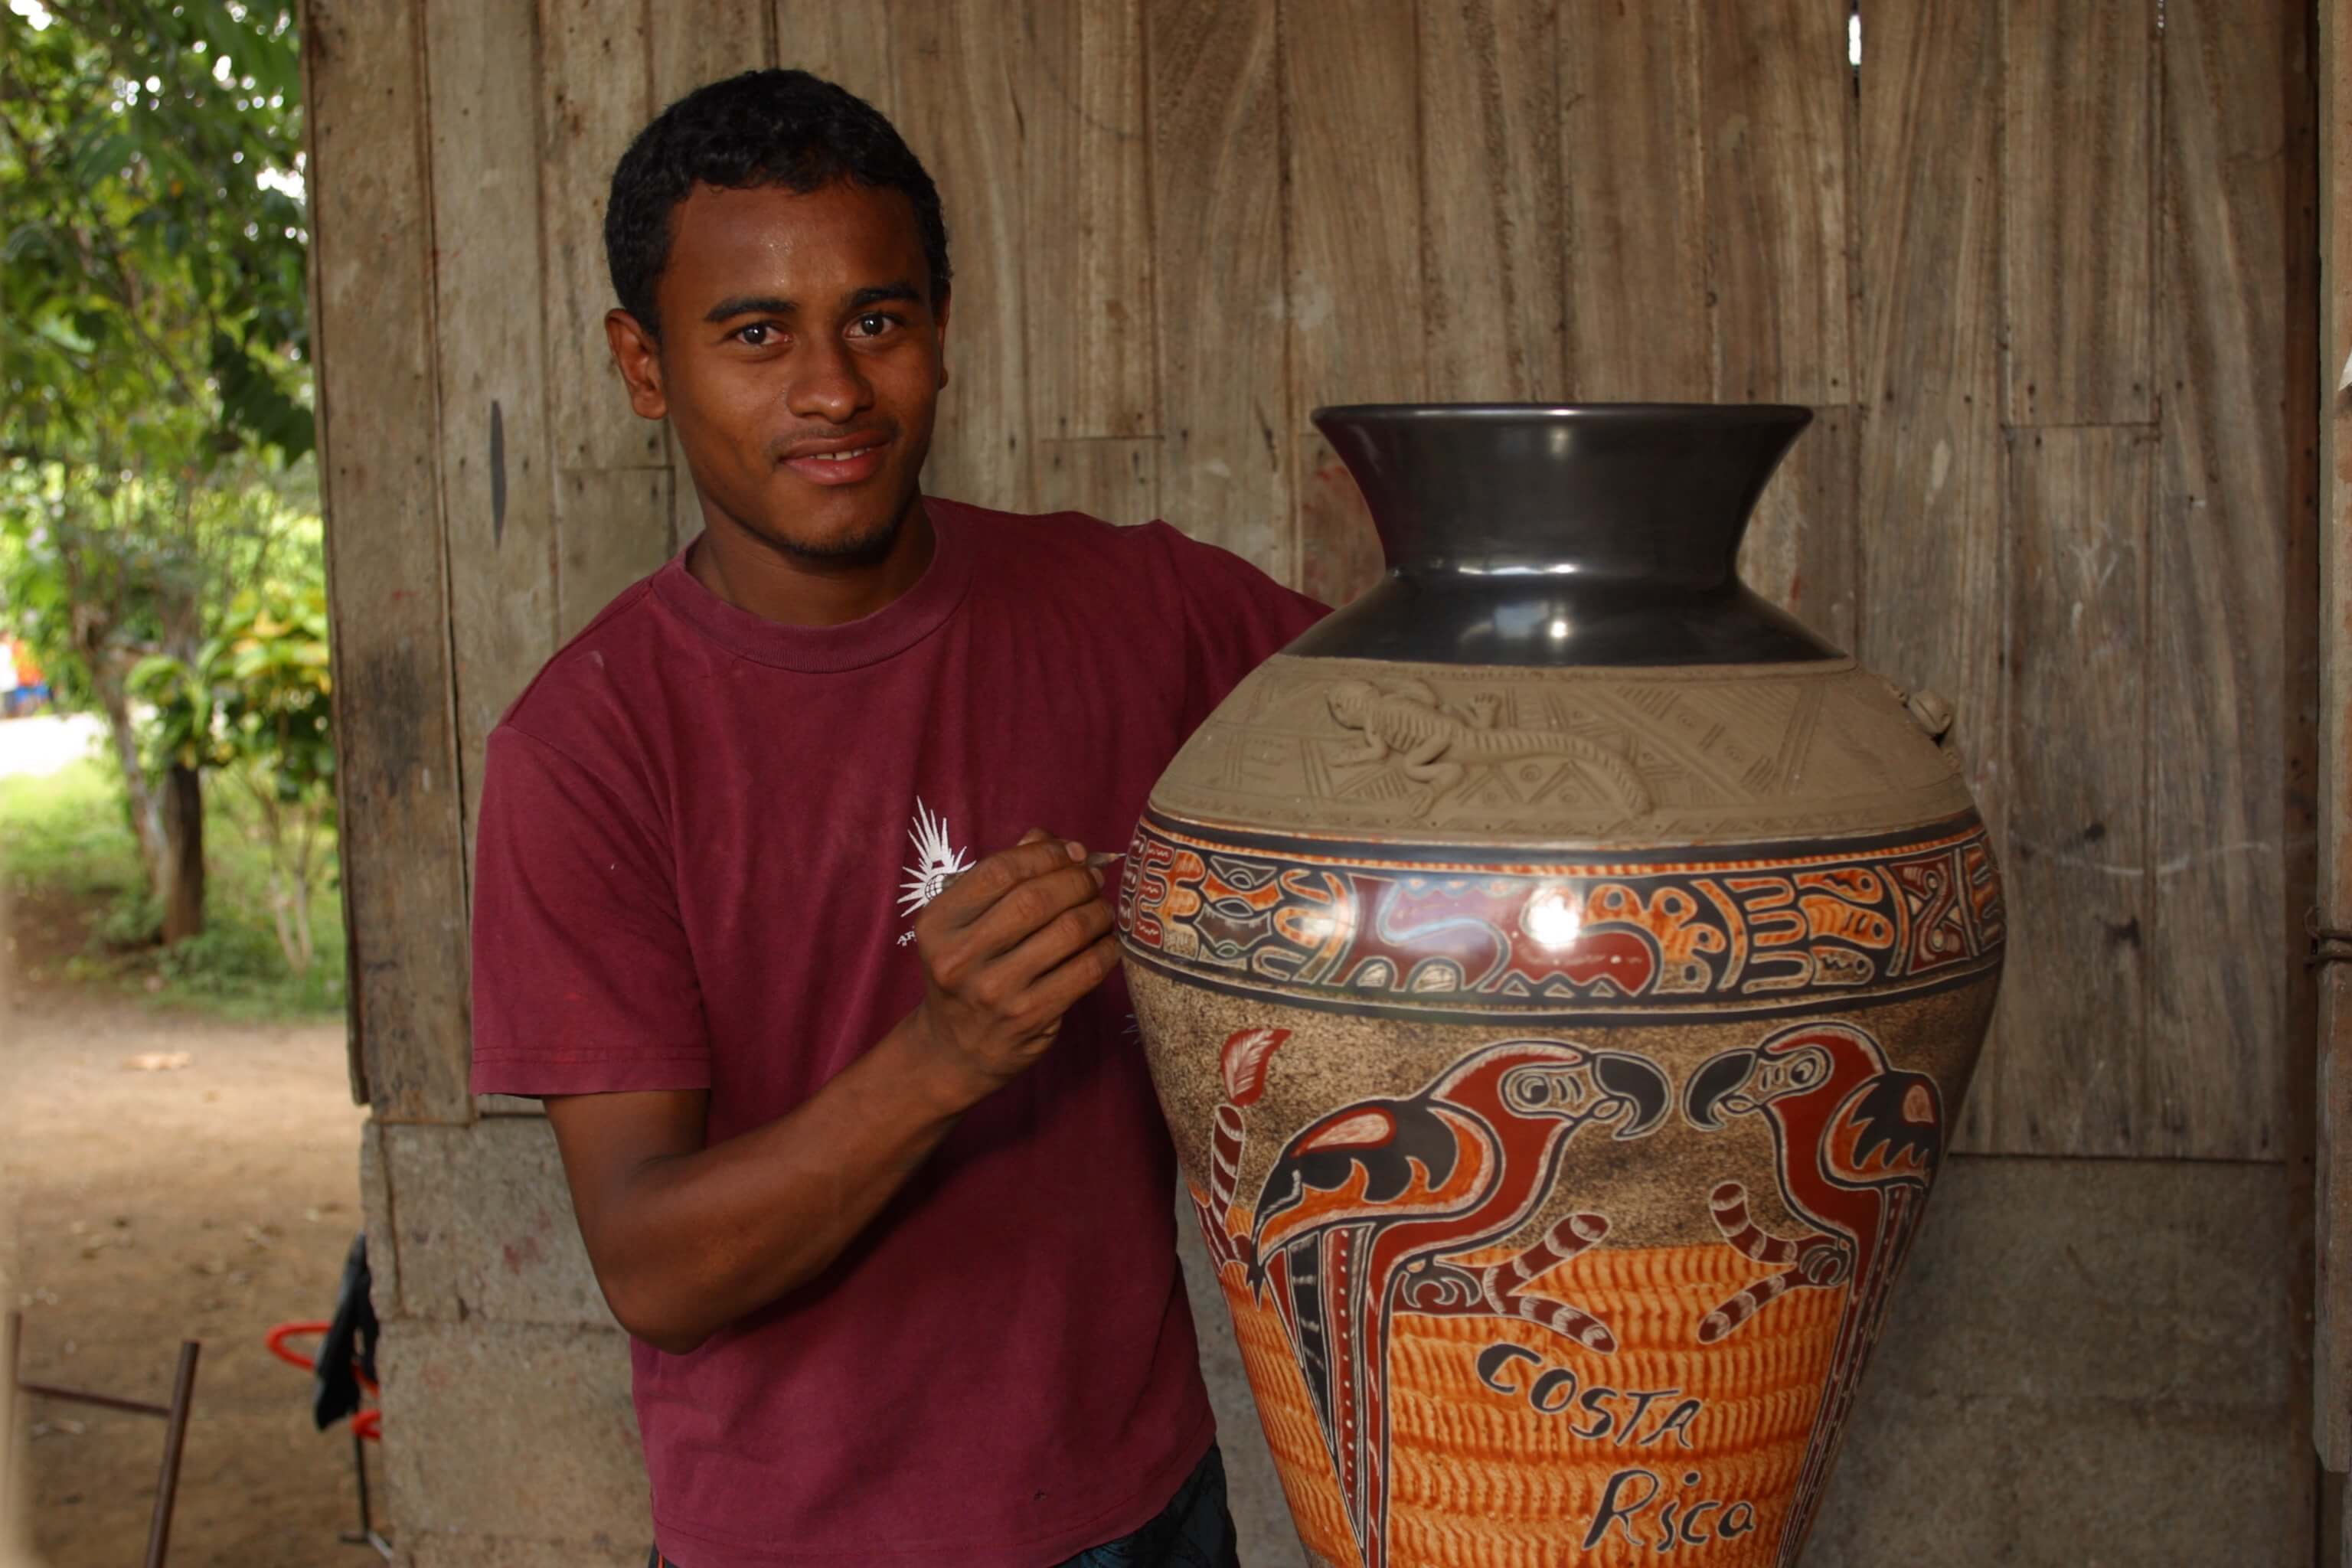 An artist from the Chorotega indigenous group in Costa Rica paints a colorful design on a large clay vase.